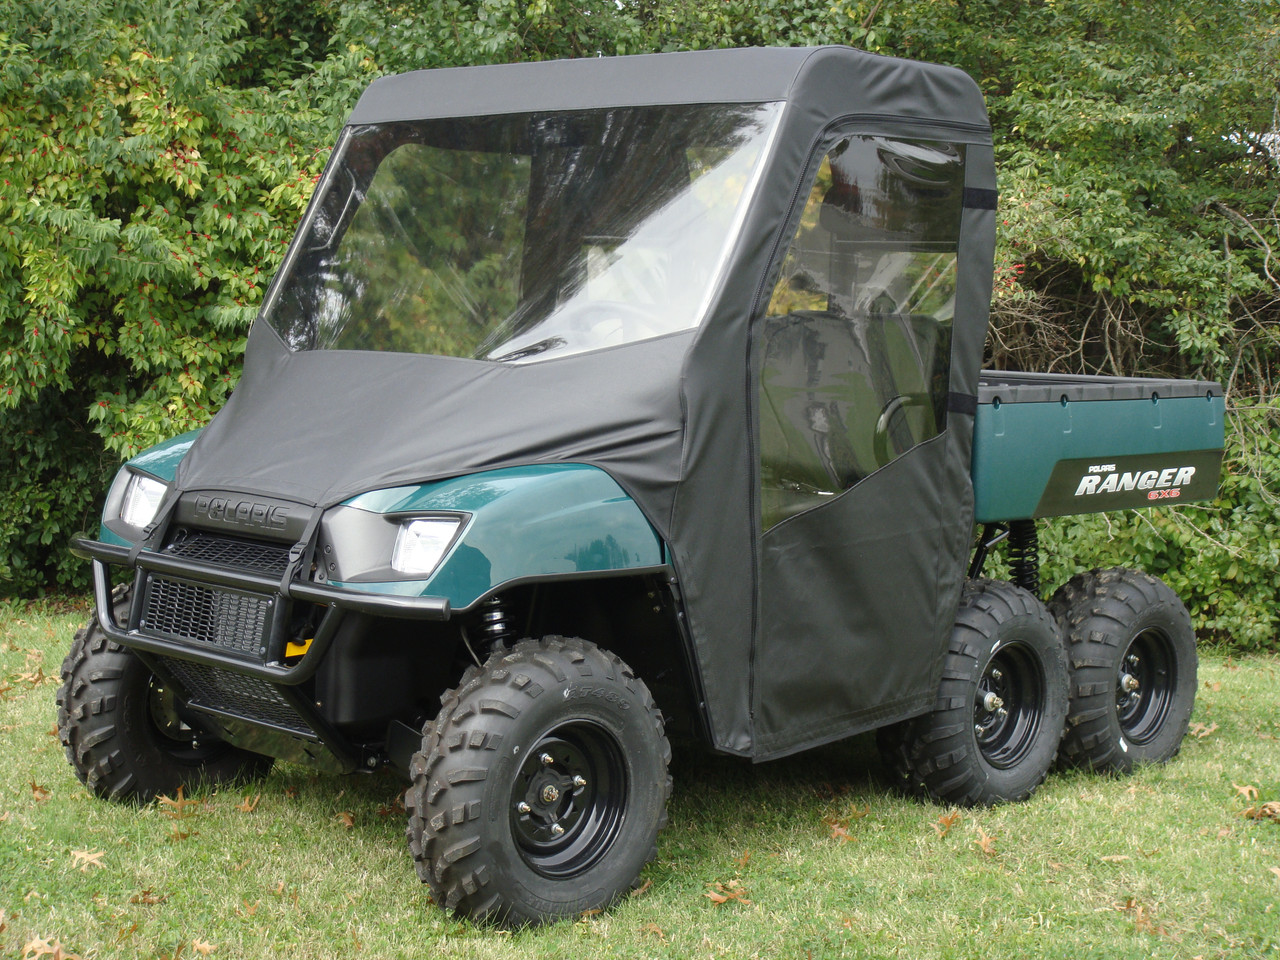 3 Star side x side Polaris Ranger 500 and 700 soft full cab enclosure with vinyl windshield front and side angle view